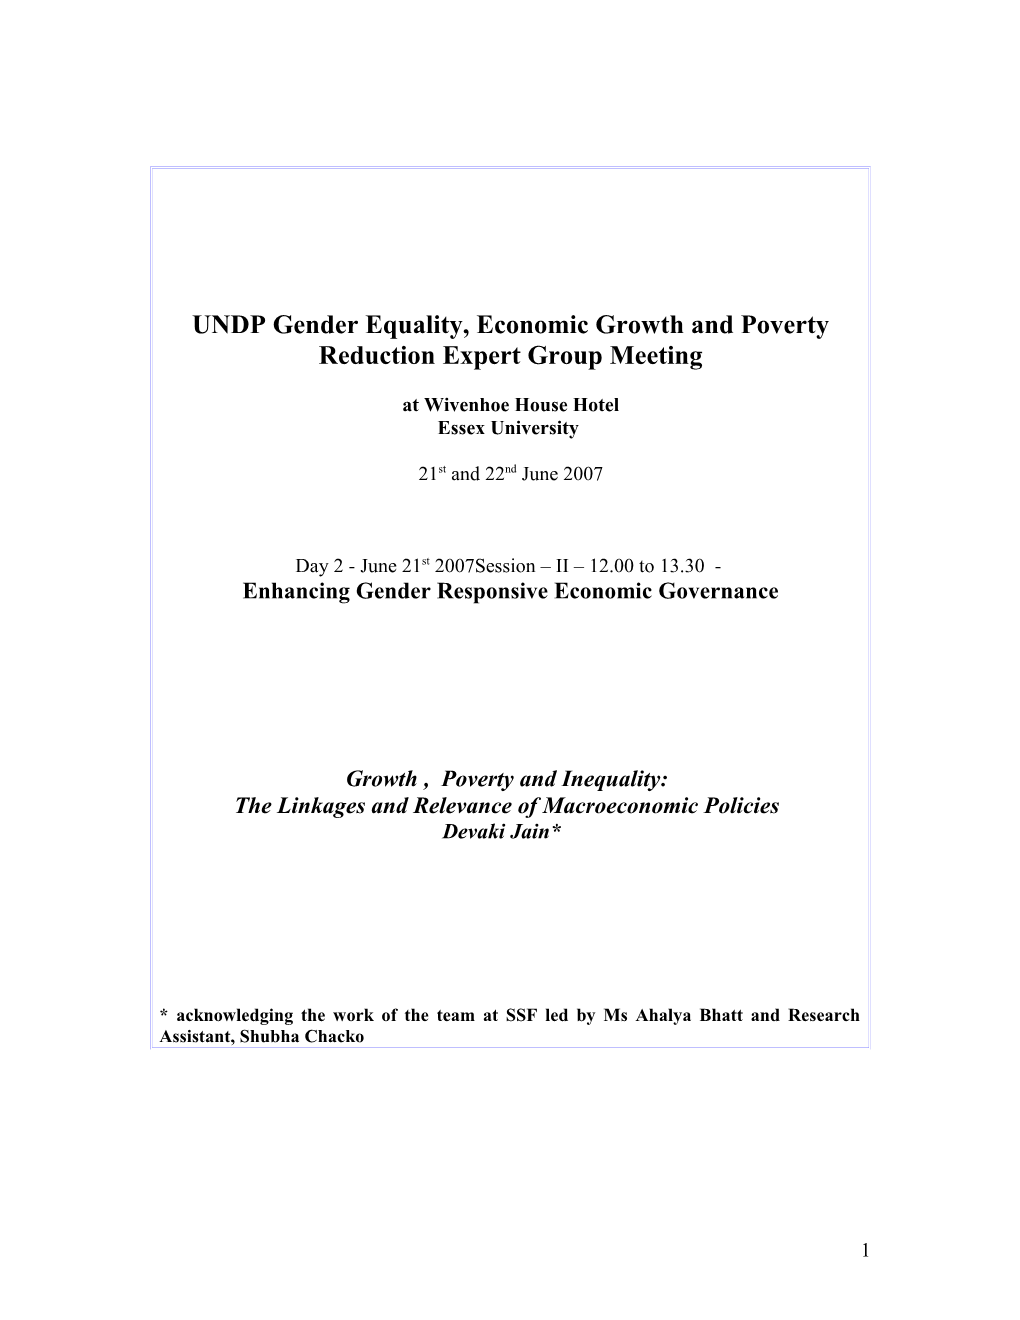 UNDP Gender Equality, Economic Growth and Poverty